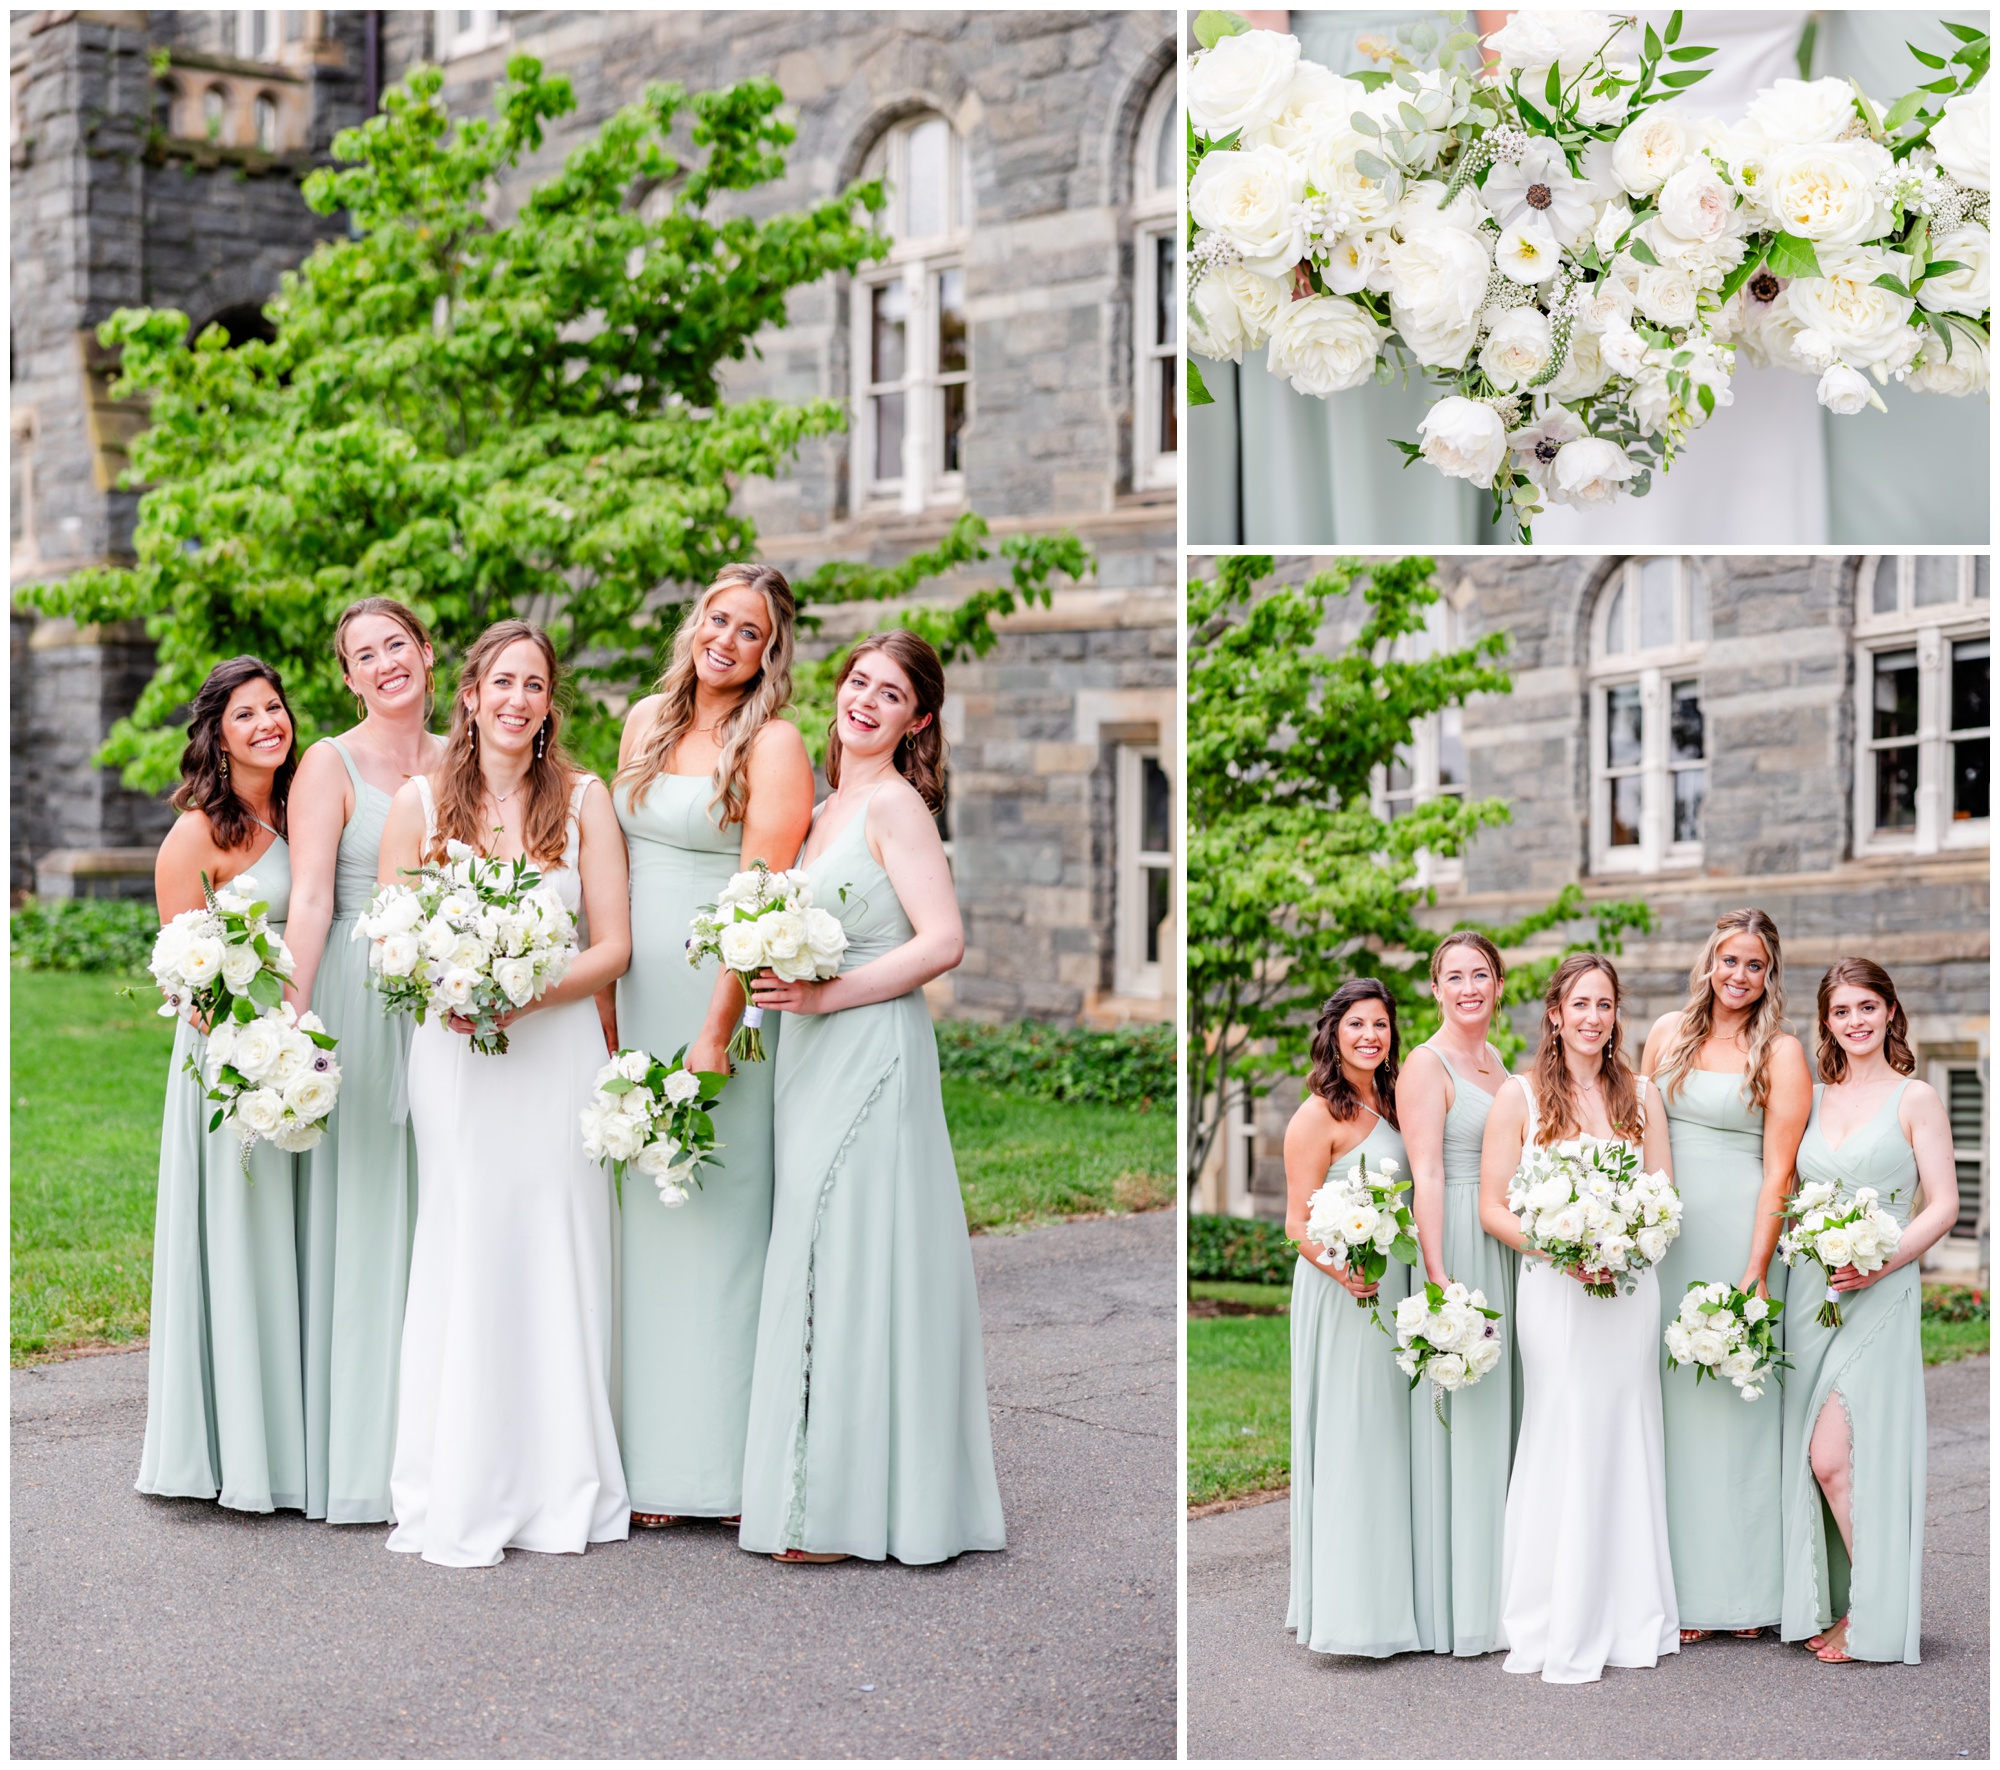 Washington D.C. summer wedding, Toolbox Washington D.C., Dupont Circle wedding venue, summer wedding aesthetic, summer wedding portraits, sage green aesthetic, Washington D.C. wedding photography, D.C. wedding photographer, Rachel E.H. Photography, Georgetown University portraits, Georgetown portraits, bridesmaids smiling, pale mint bridesmaids dresses, white bouquet, Carolyn Thombs hair and makeup